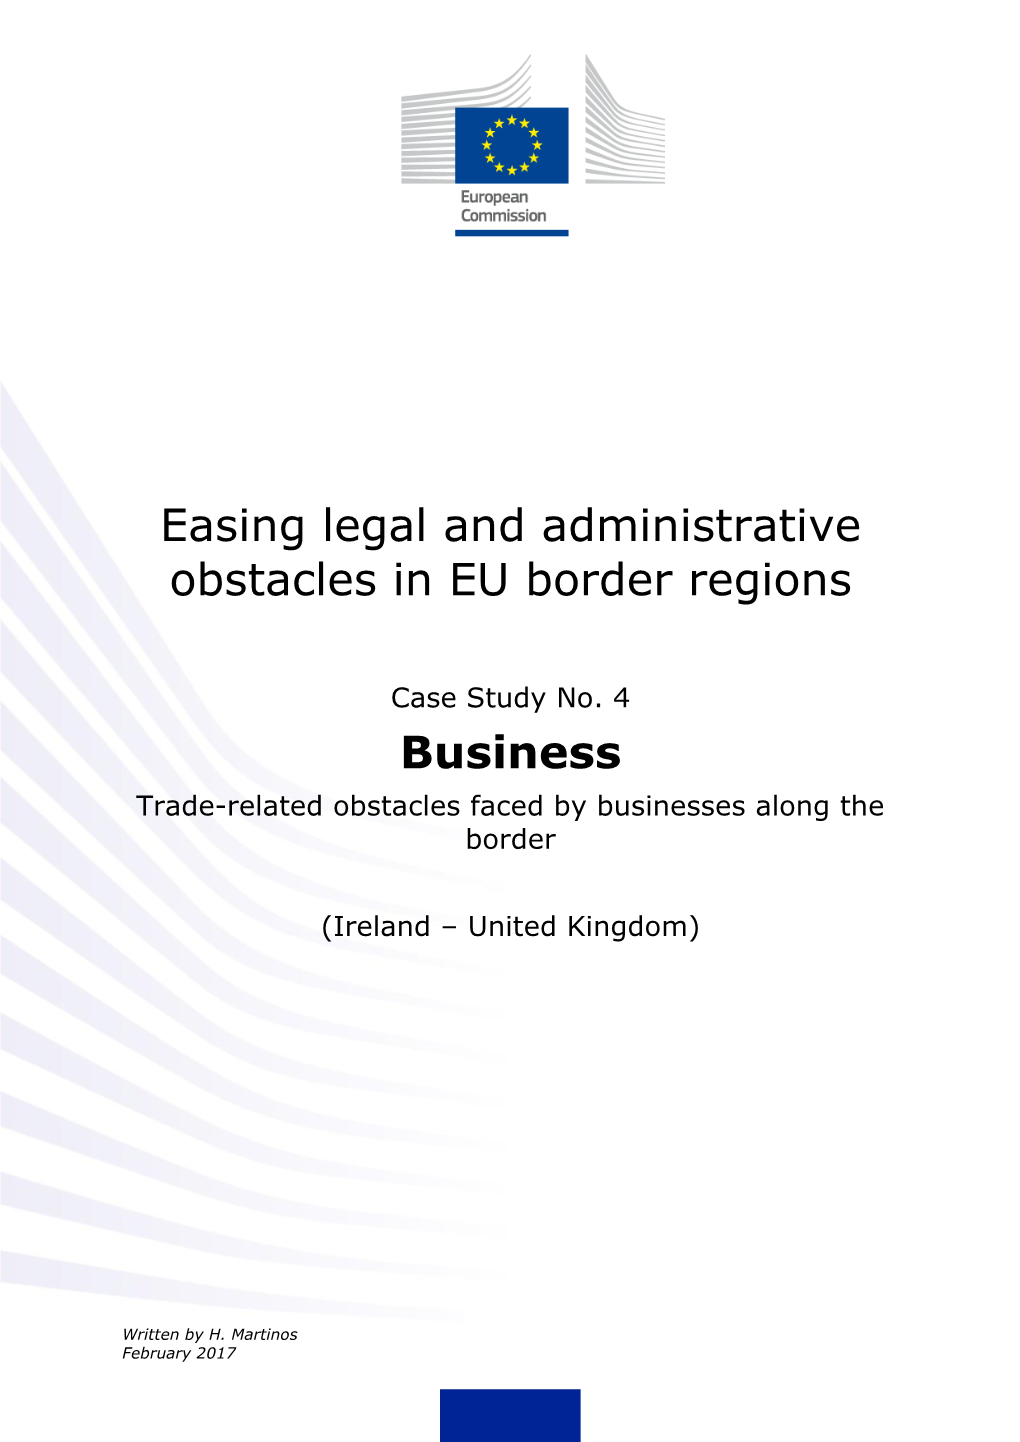 Easing Legal and Administrative Obstacles in EU Border Regions